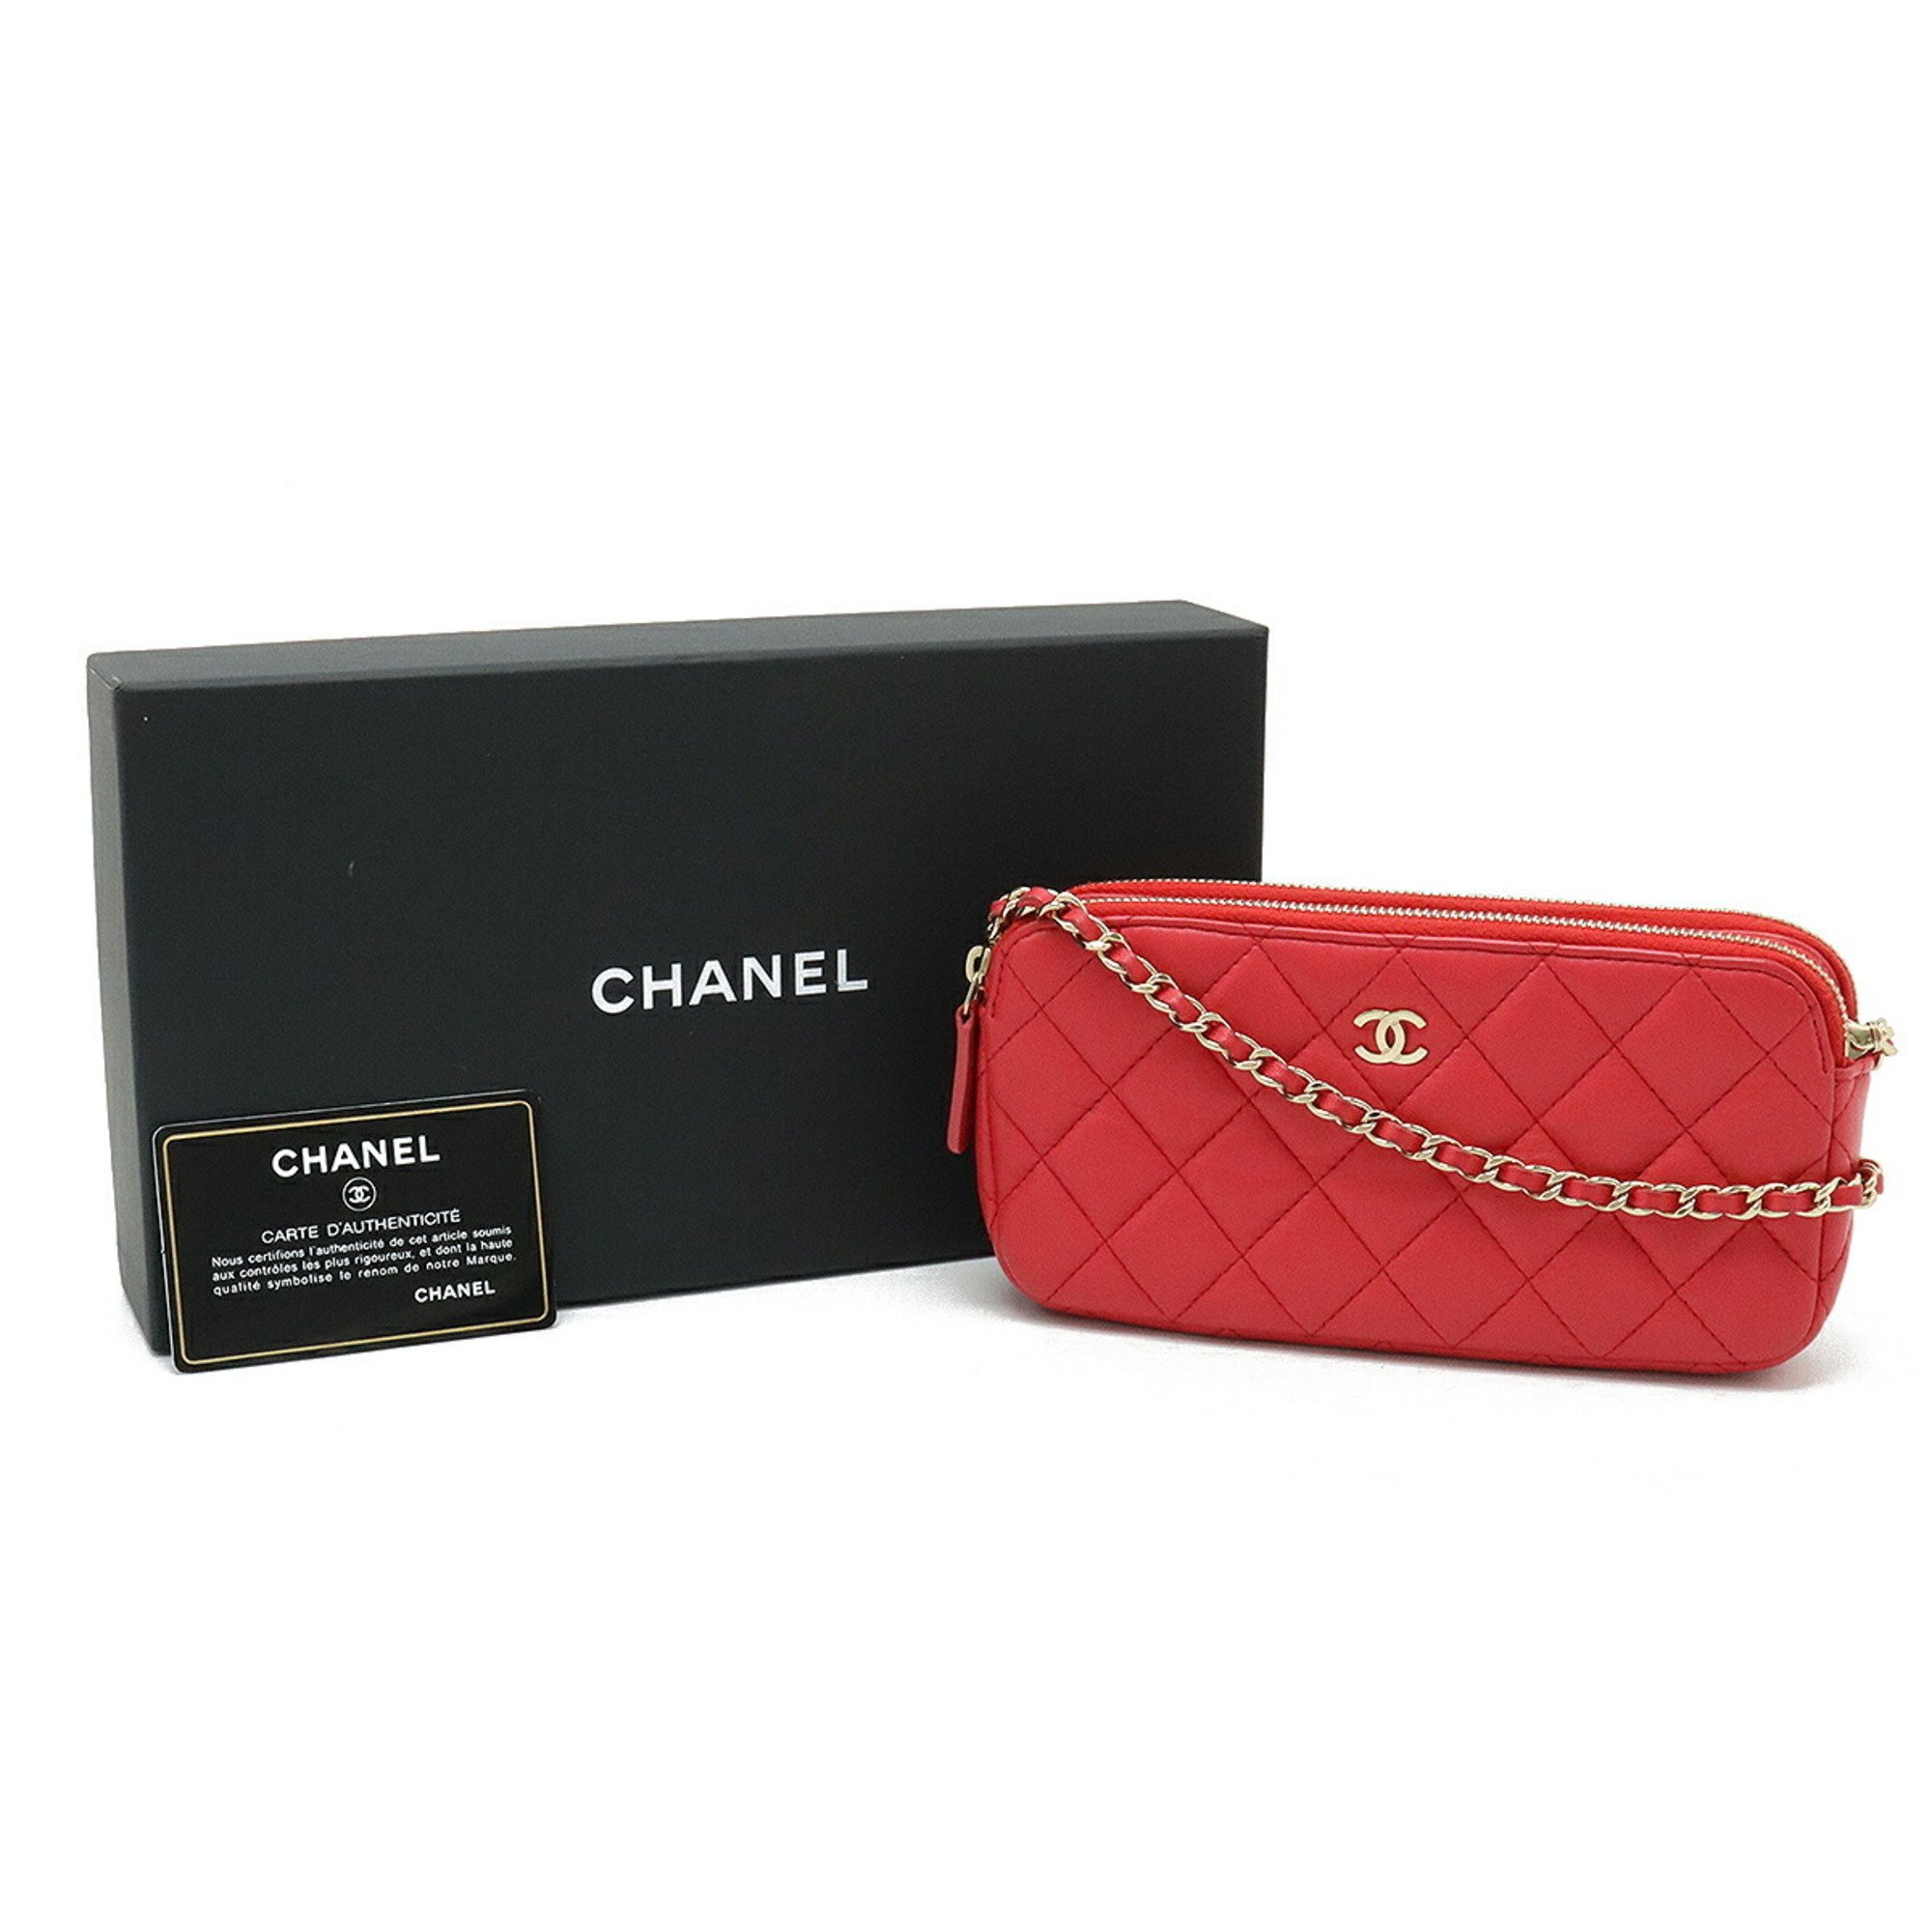 CHANEL Chanel Matelasse W Zip Chain Wallet Shoulder Clutch Bag Leather Pink Red A82527